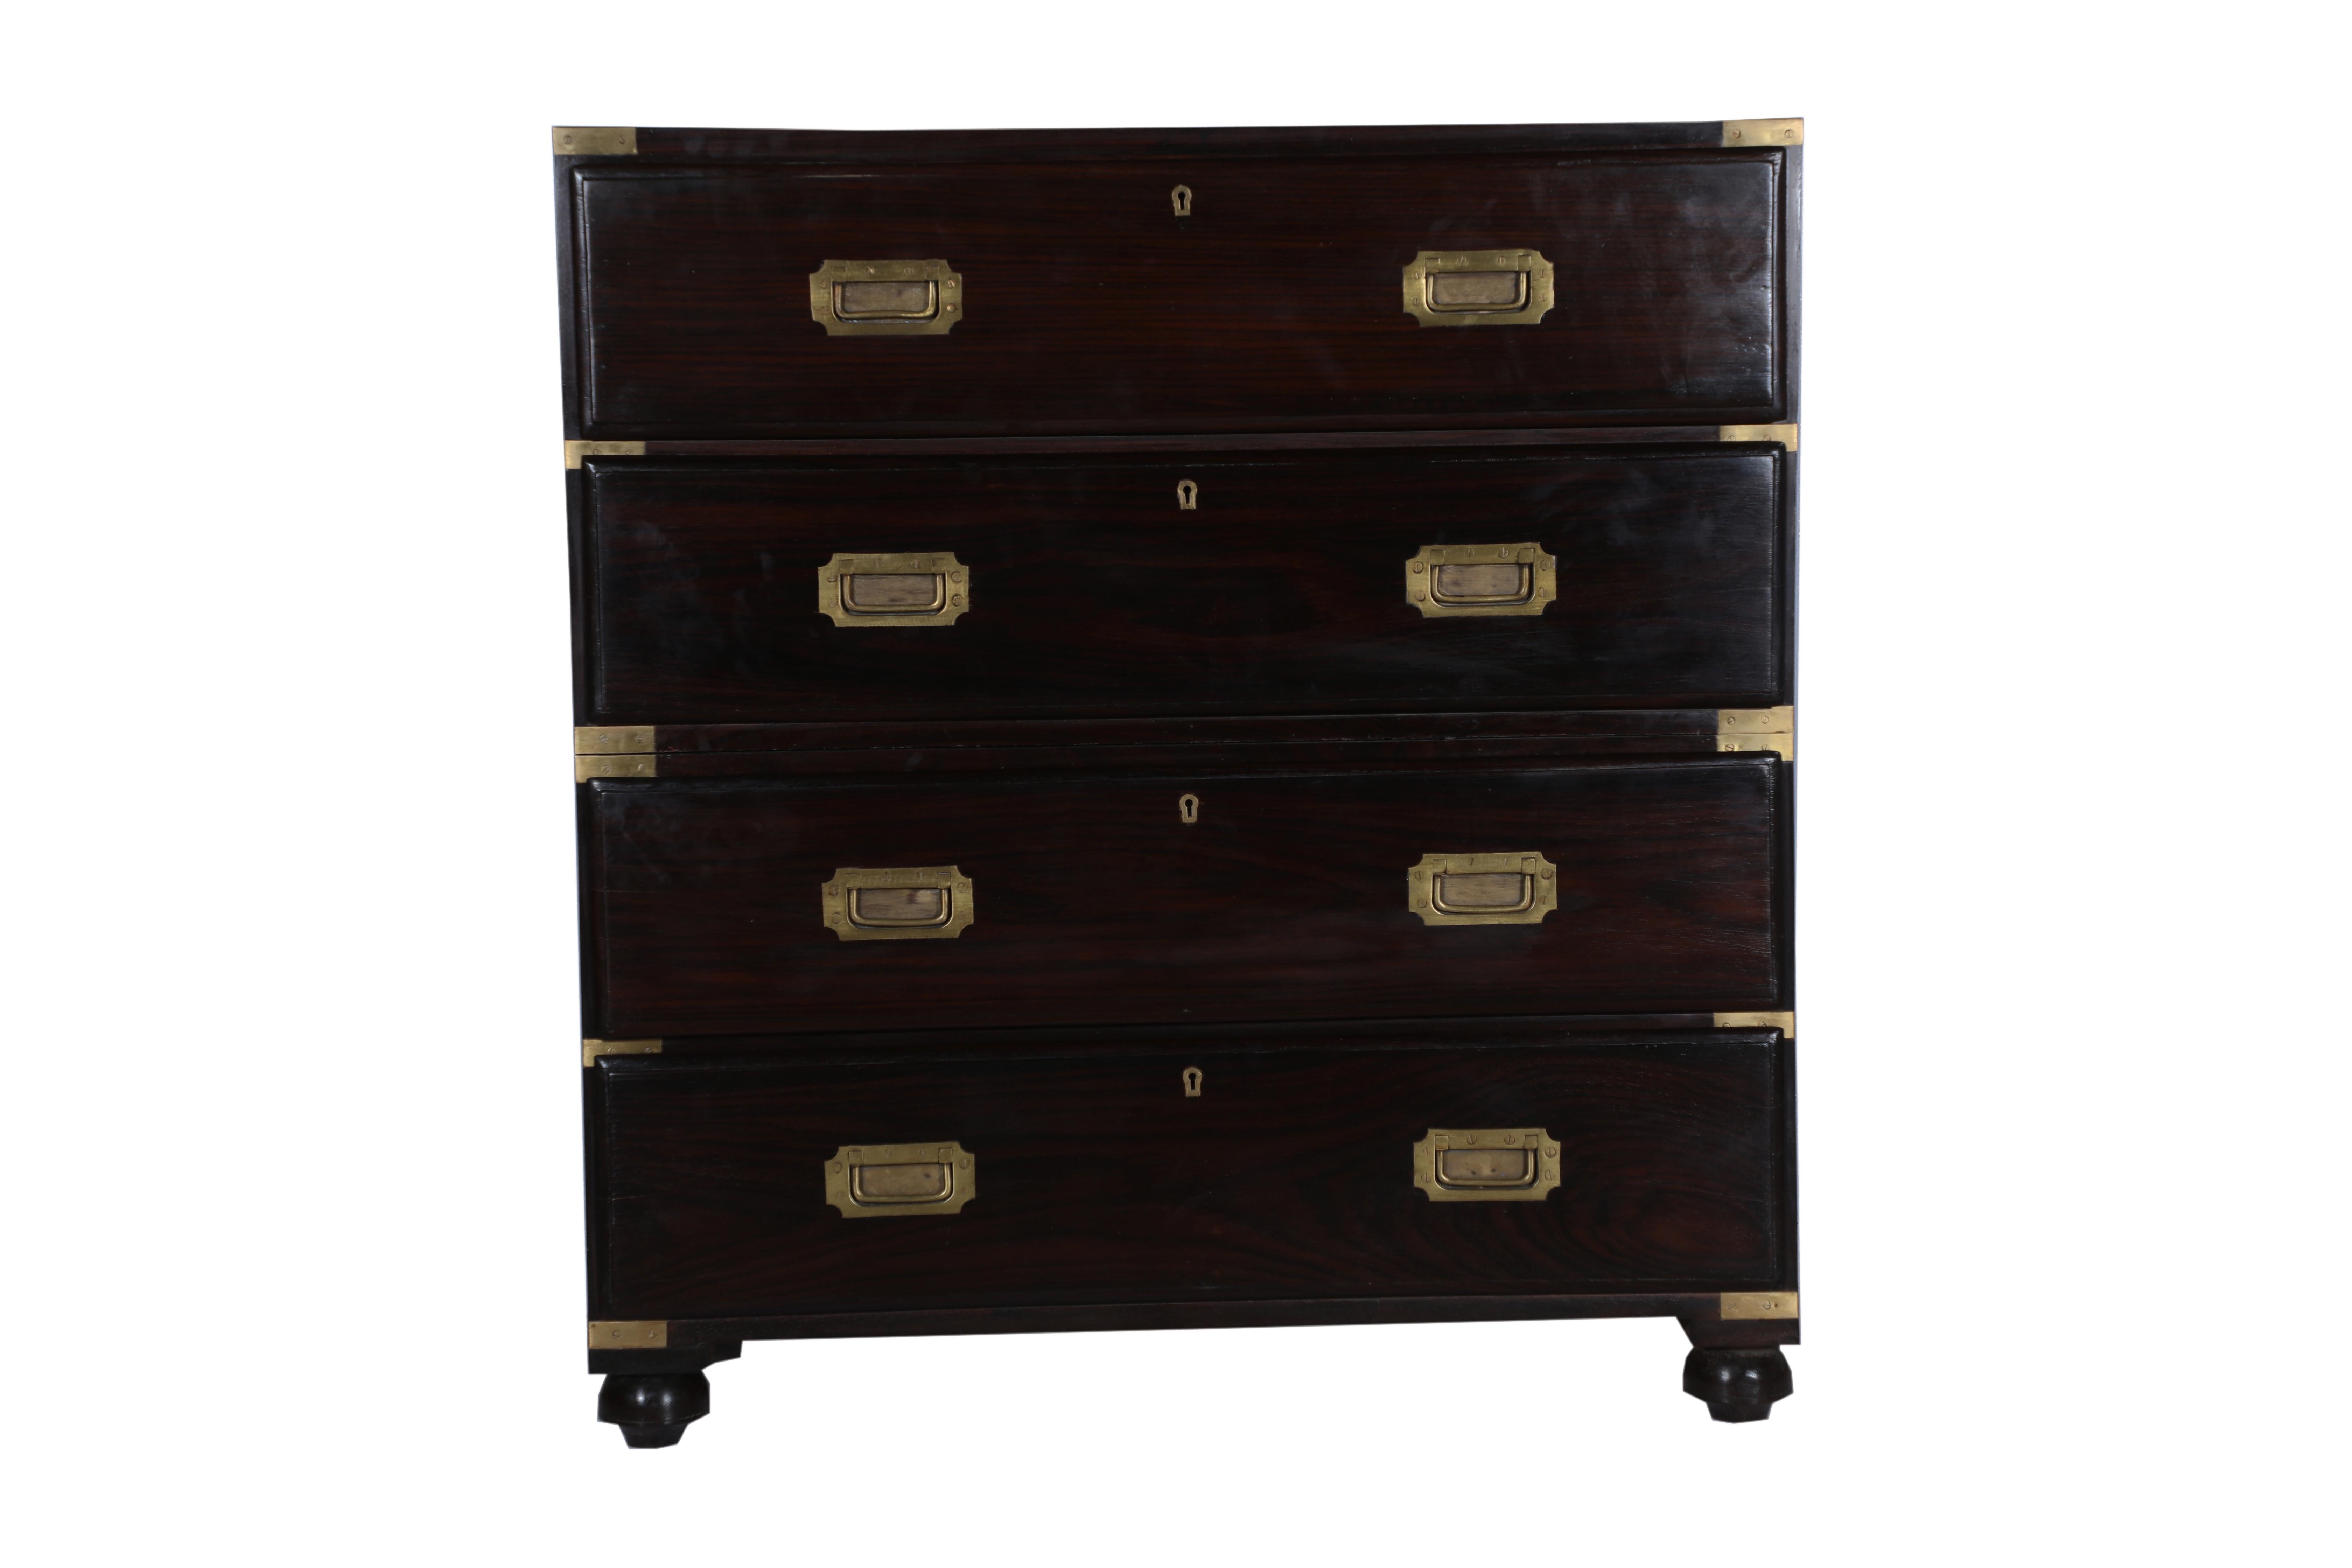 A handsome and elegant British Campaign rosewood secretary and chest of drawers. Divided into two lower and upper halves as most Campaign pieces do, brass strap corners and flush brass drawer pulls.
The desk portion falls at 30